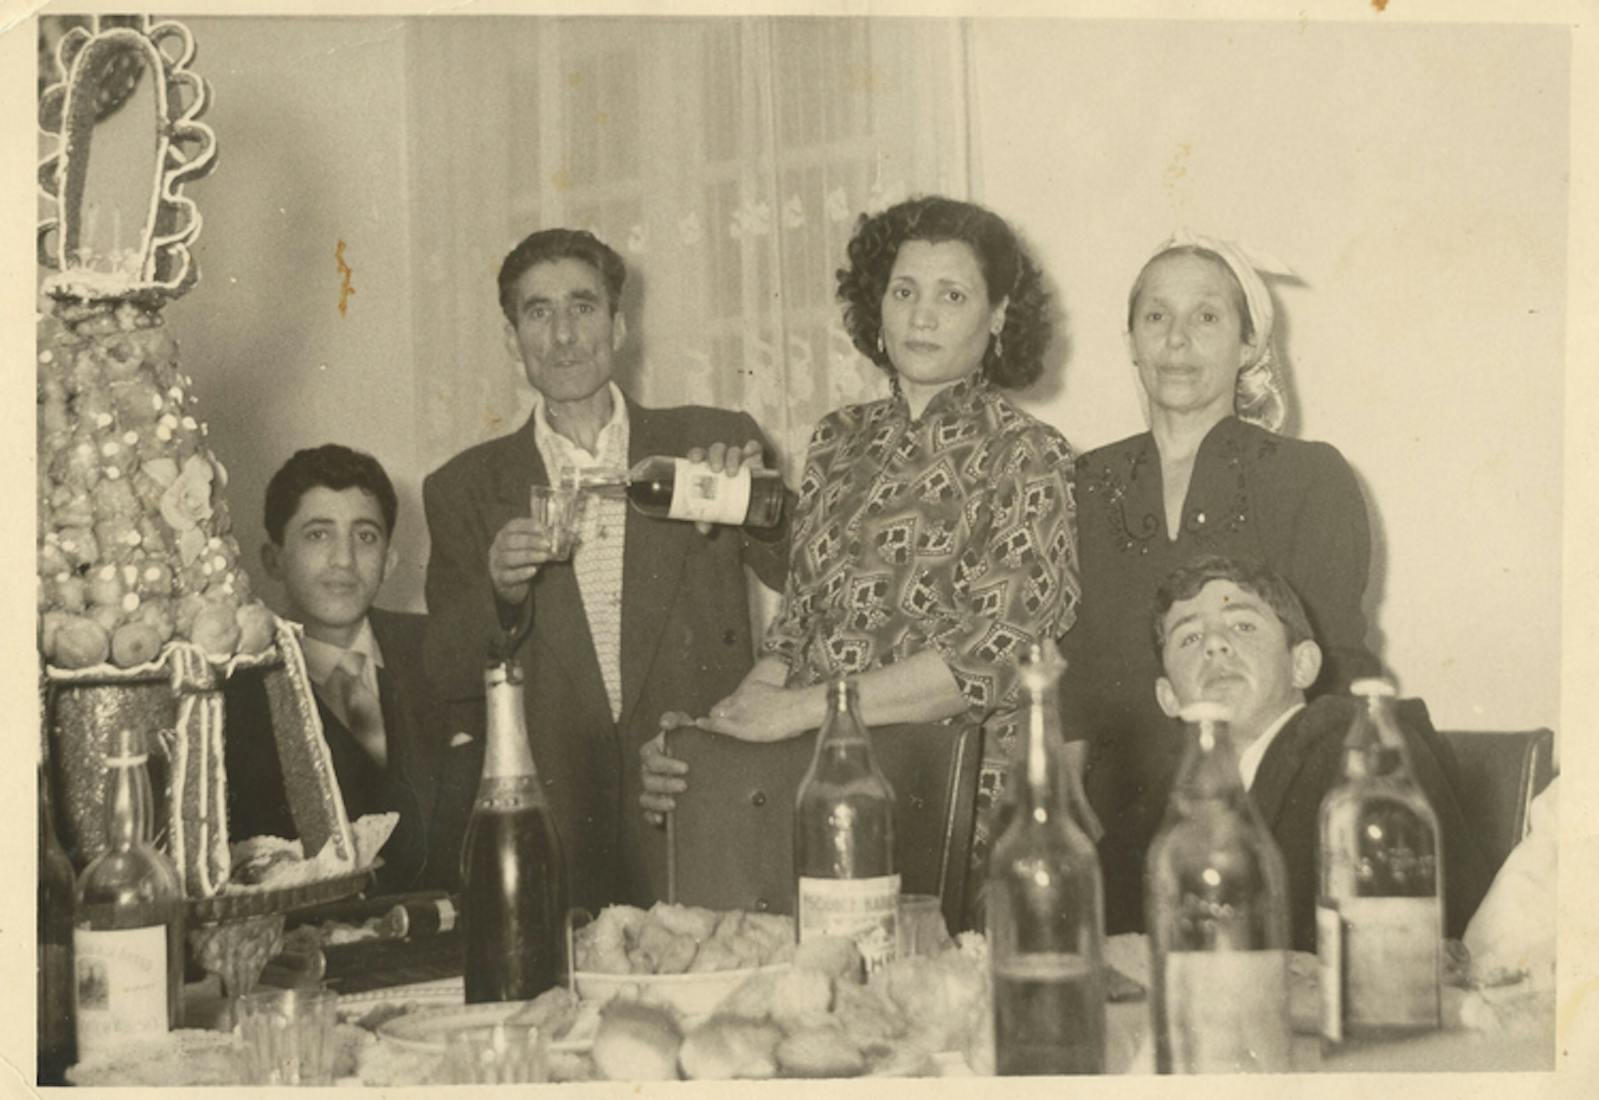 Joanna’s grandparents, Janet and Nissim, (center) in 1943